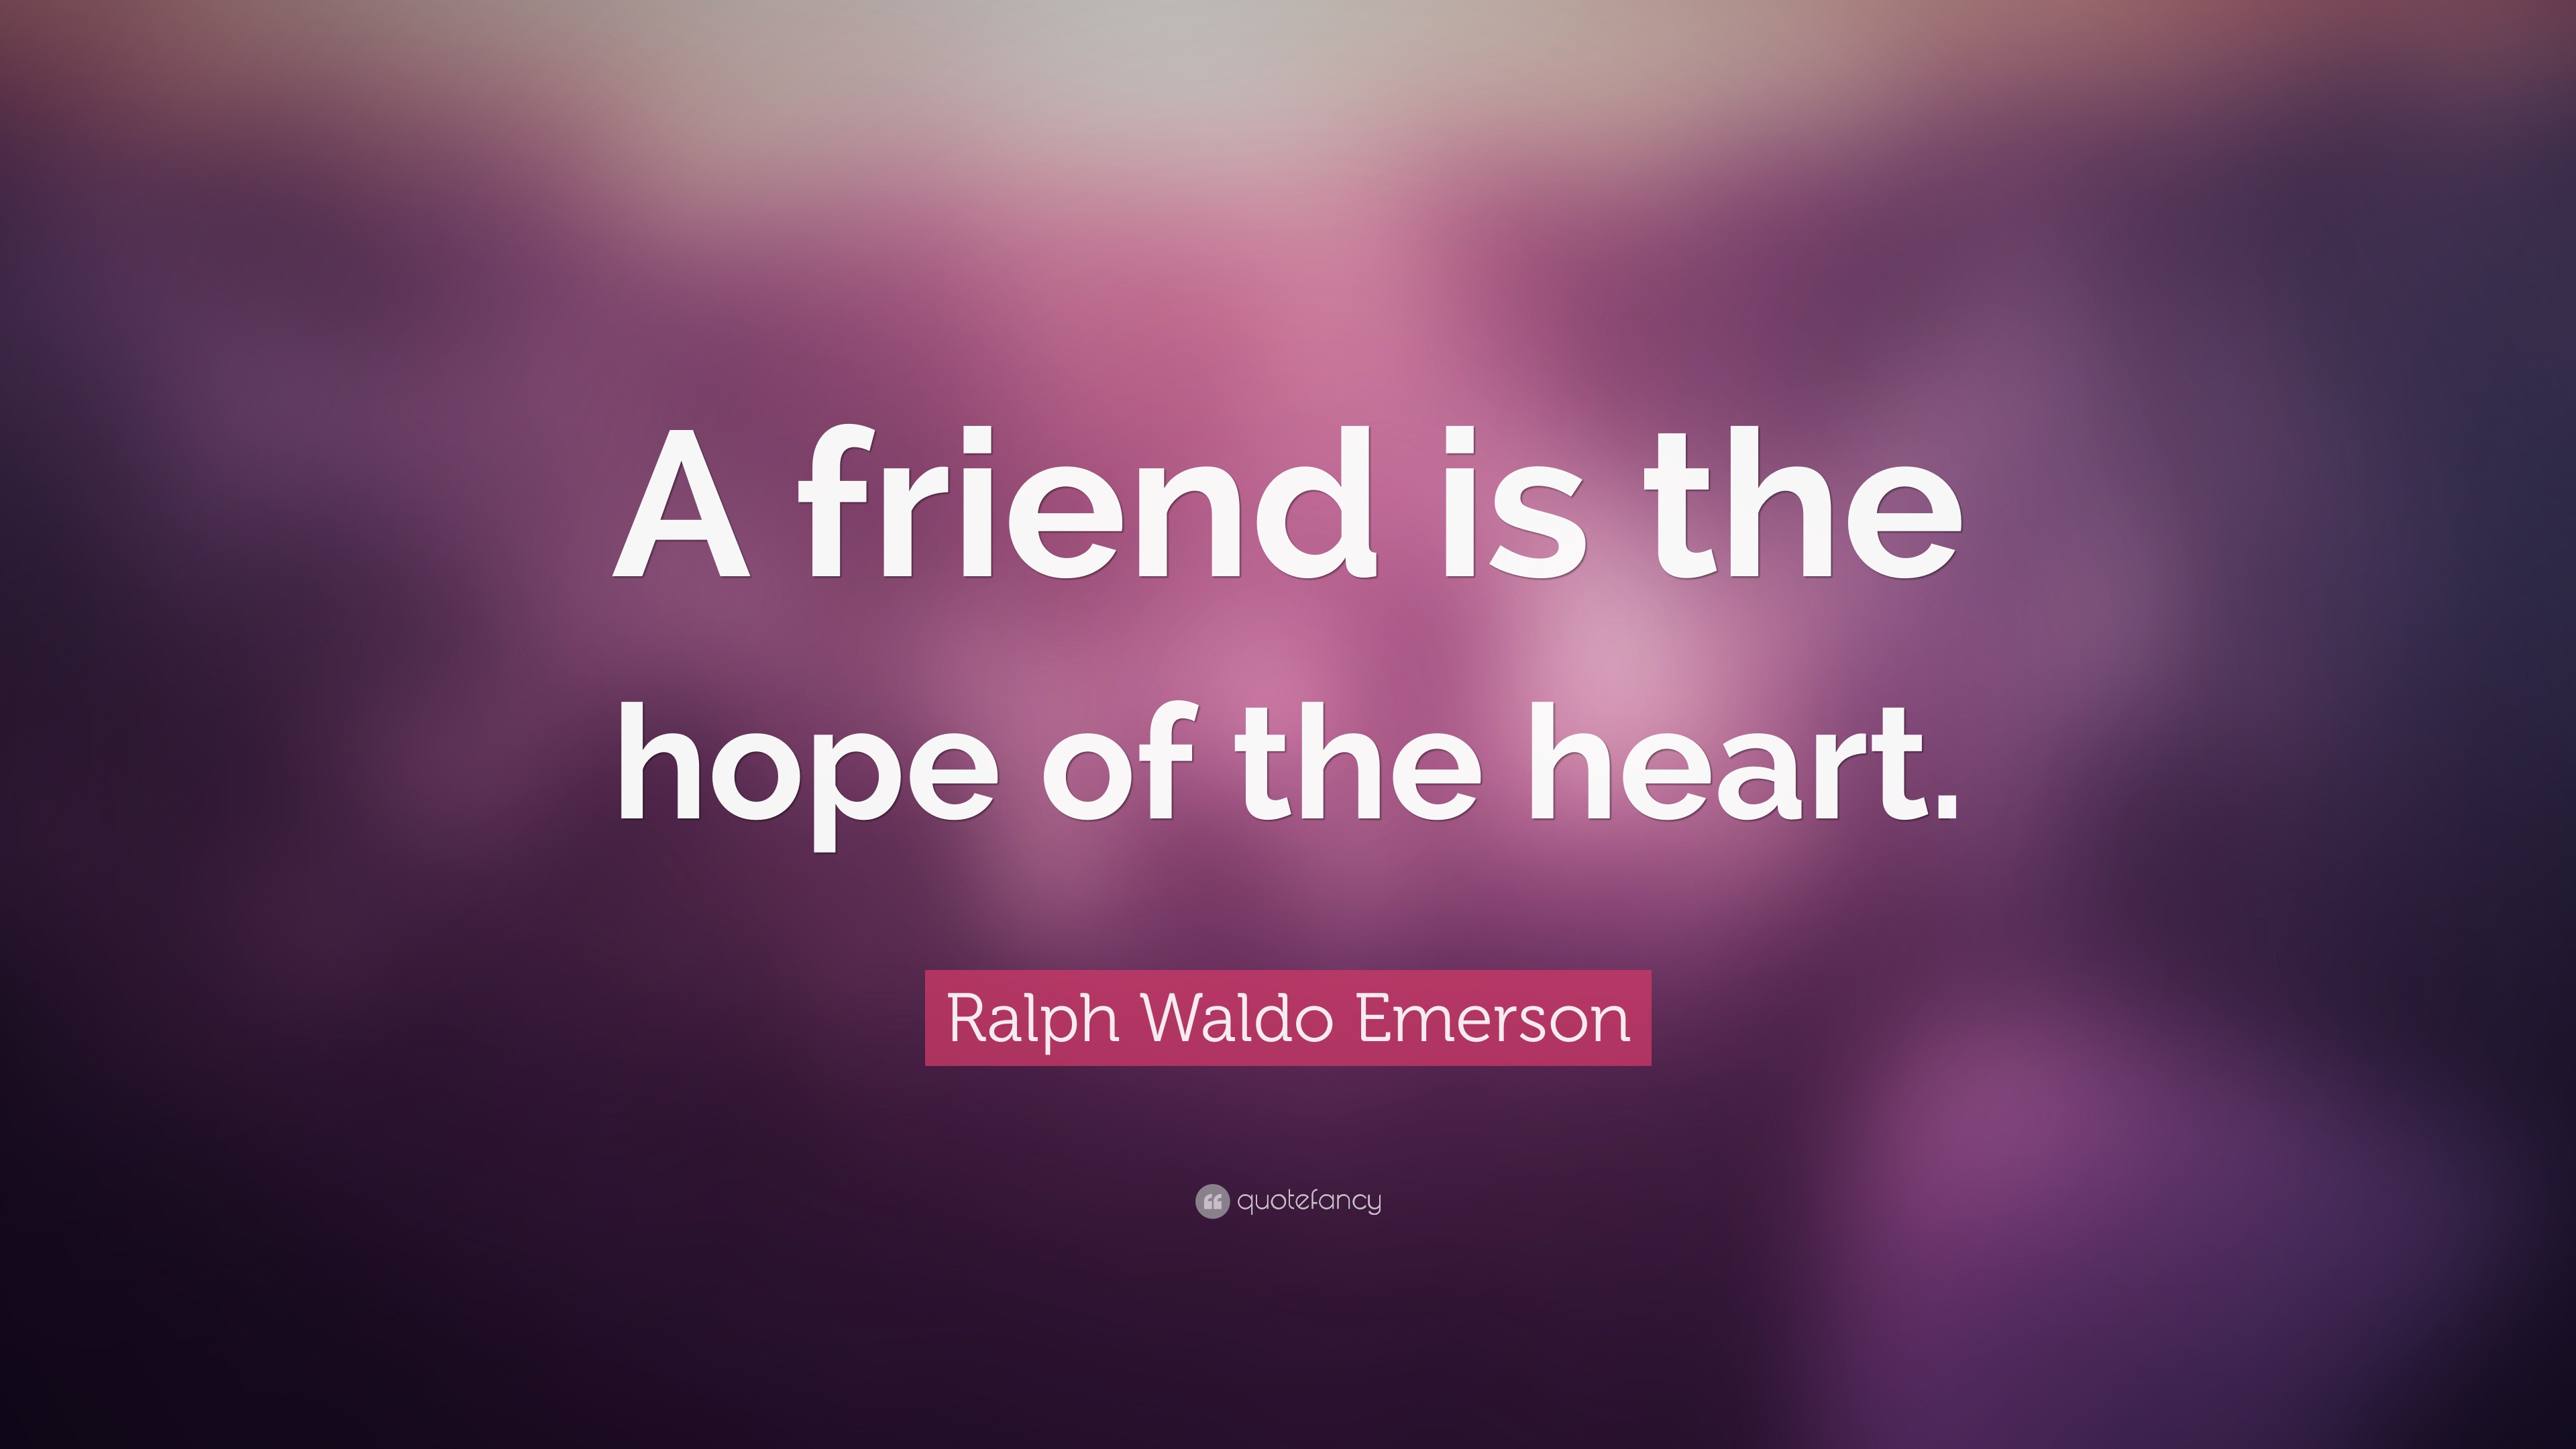 Ralph Waldo Emerson Quote: “A friend is the hope of the heart.”